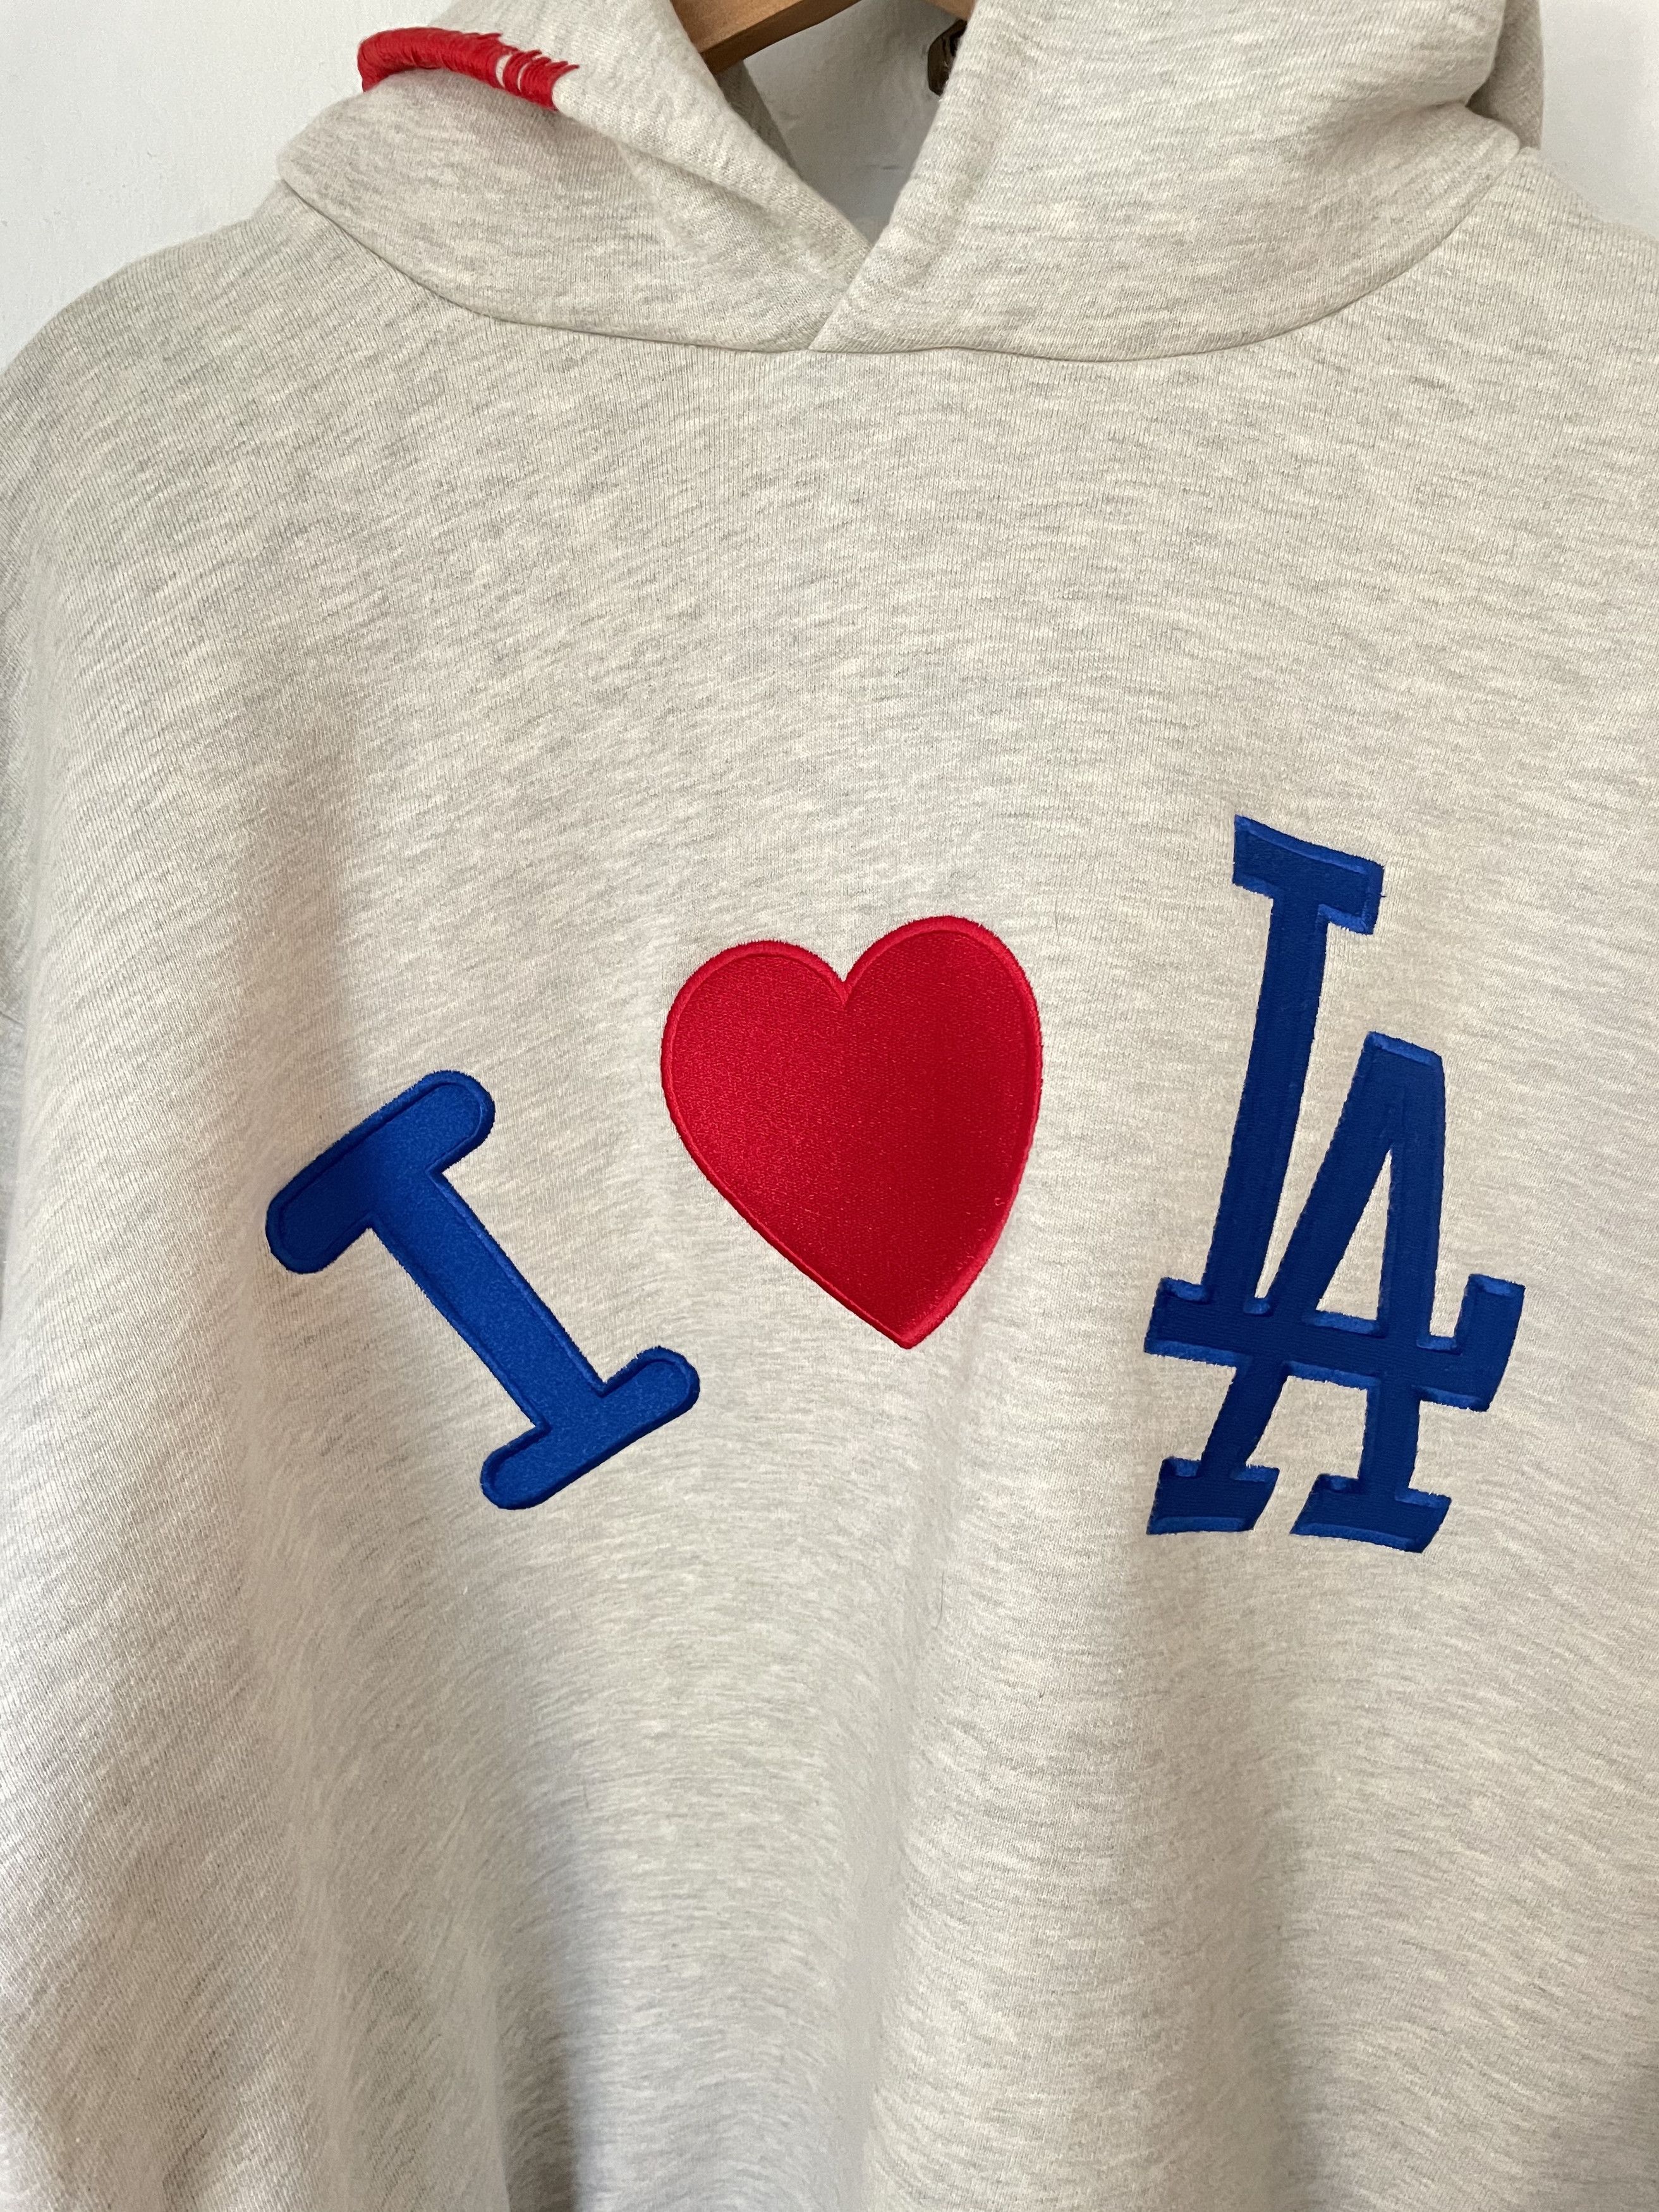 Madhappy Los Angeles Dodgers x MadHappy SIDE POCKET HERITAGE HOODIE Size US M / EU 48-50 / 2 - 2 Preview